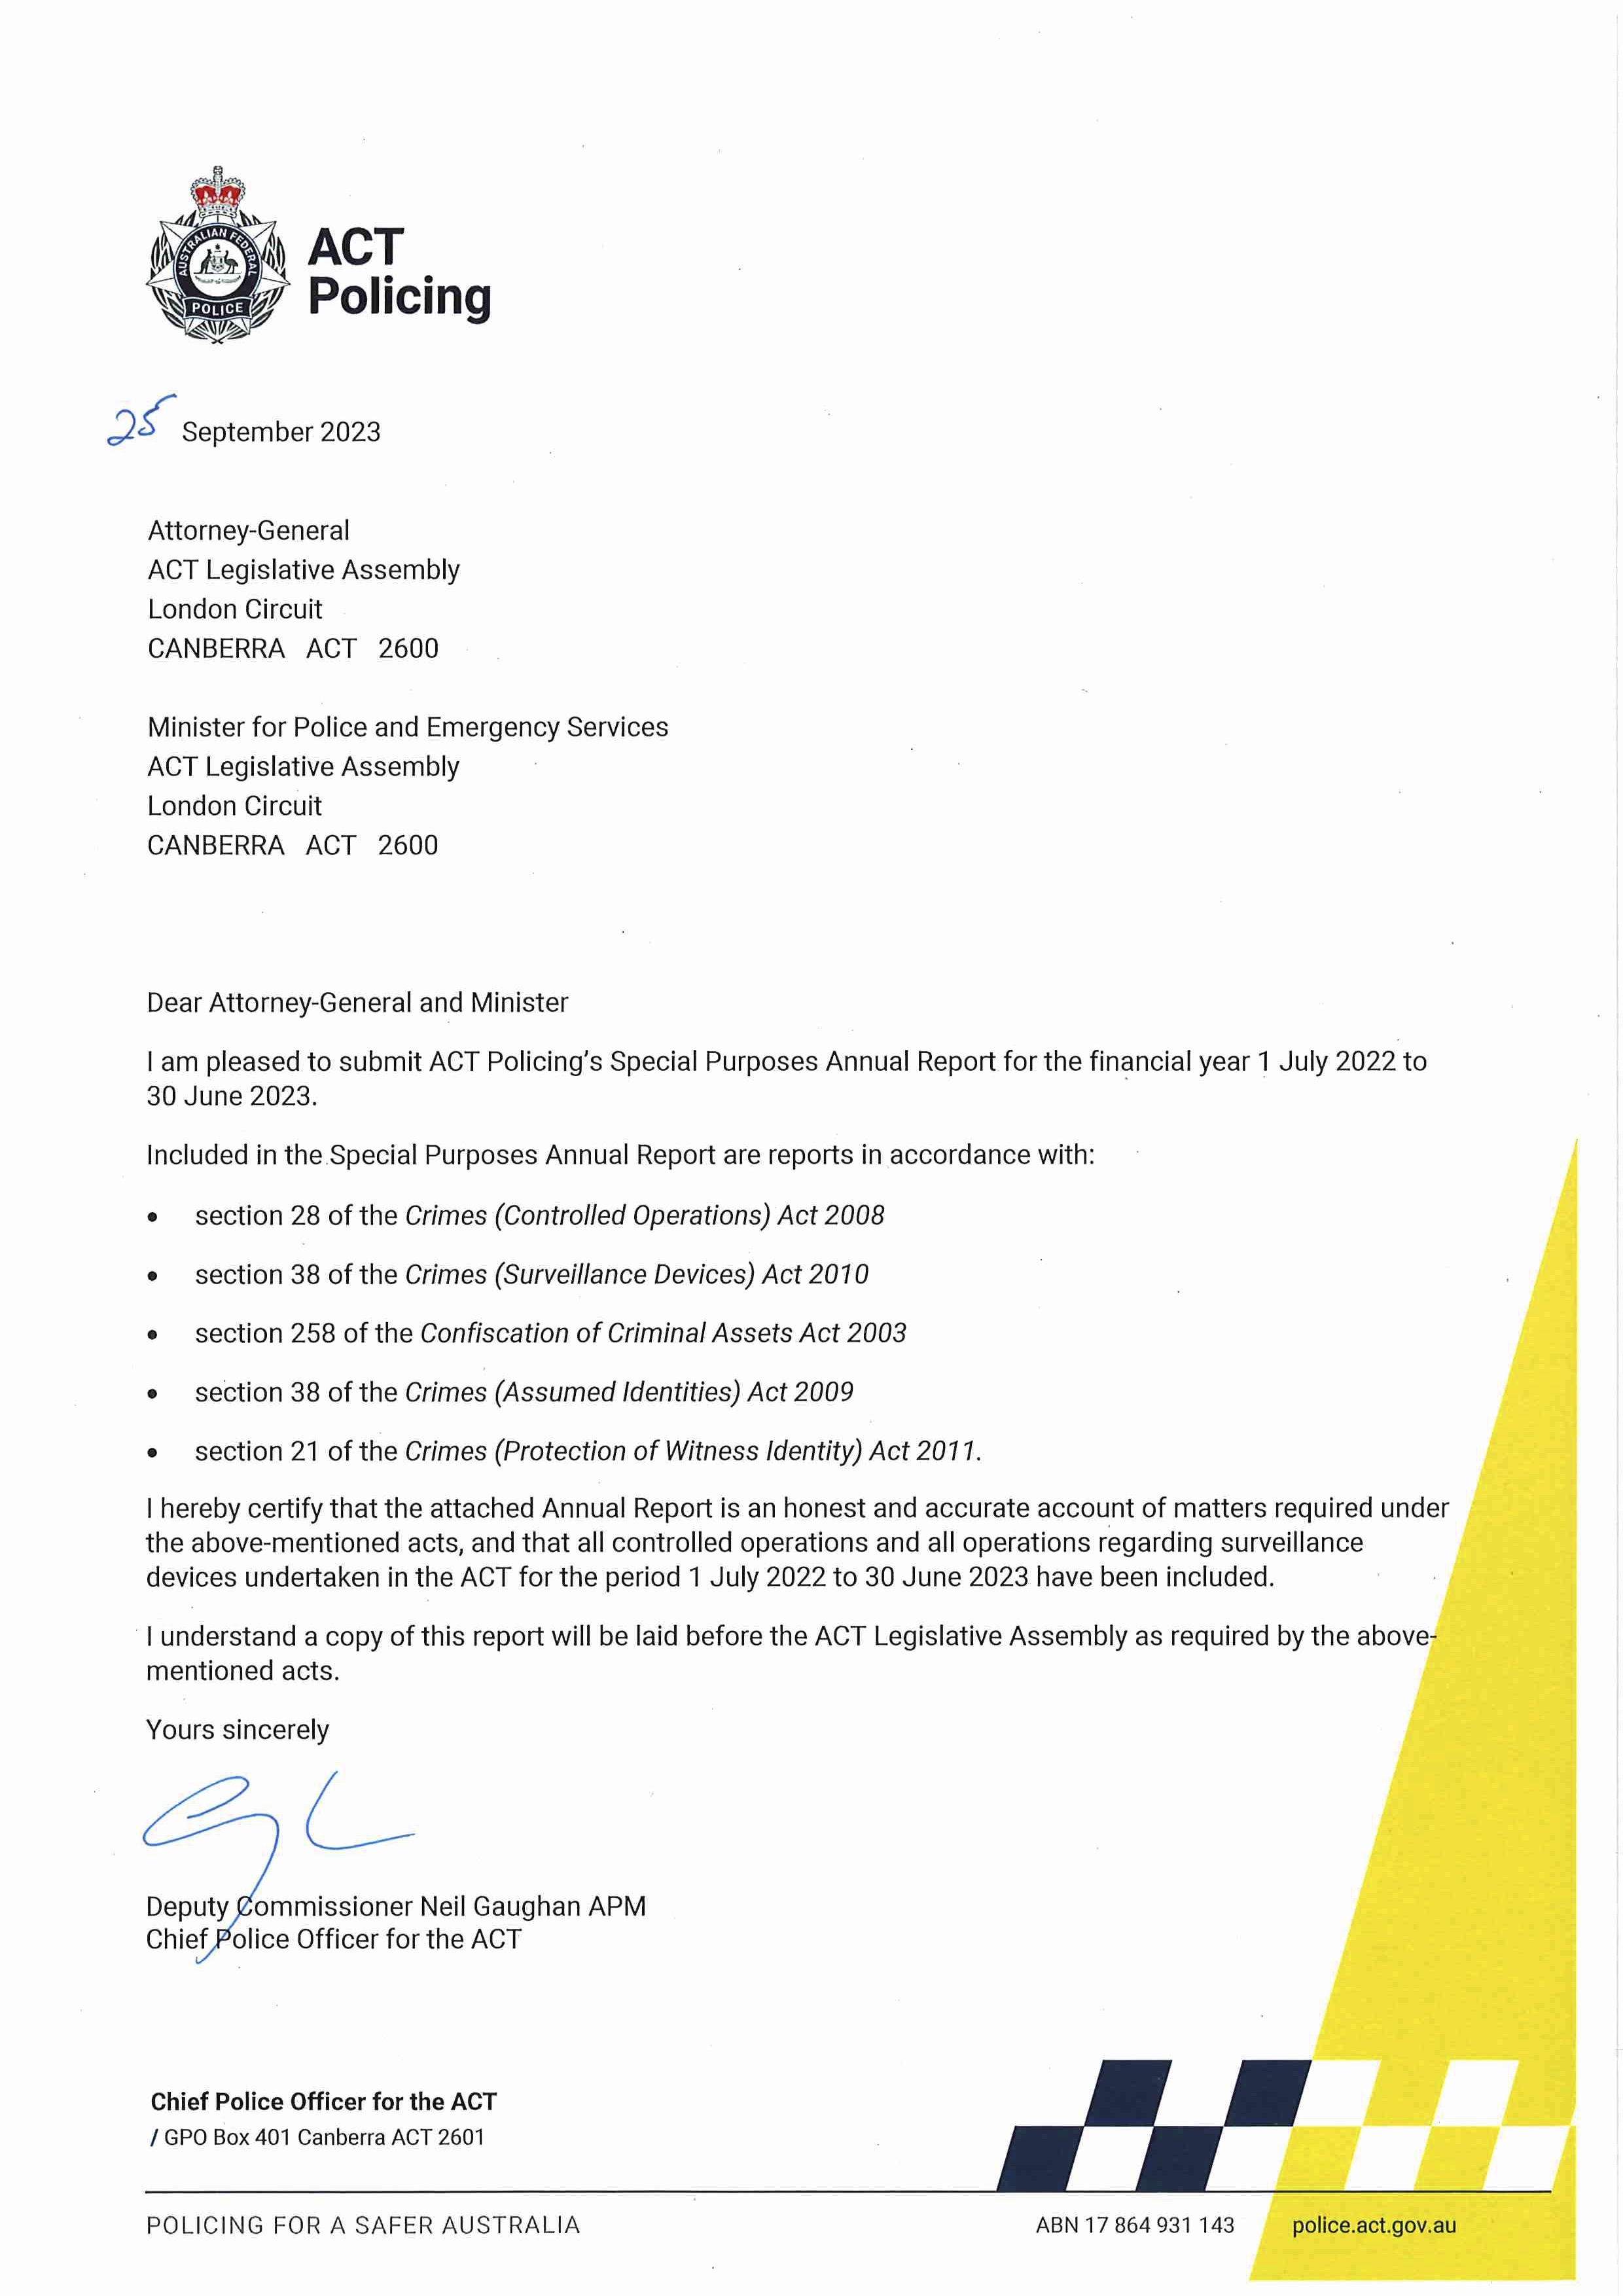 Letter of transmittal signed by Deputy Commissioner Neil Gaughan APM – Chief Police Officer for the ACT.